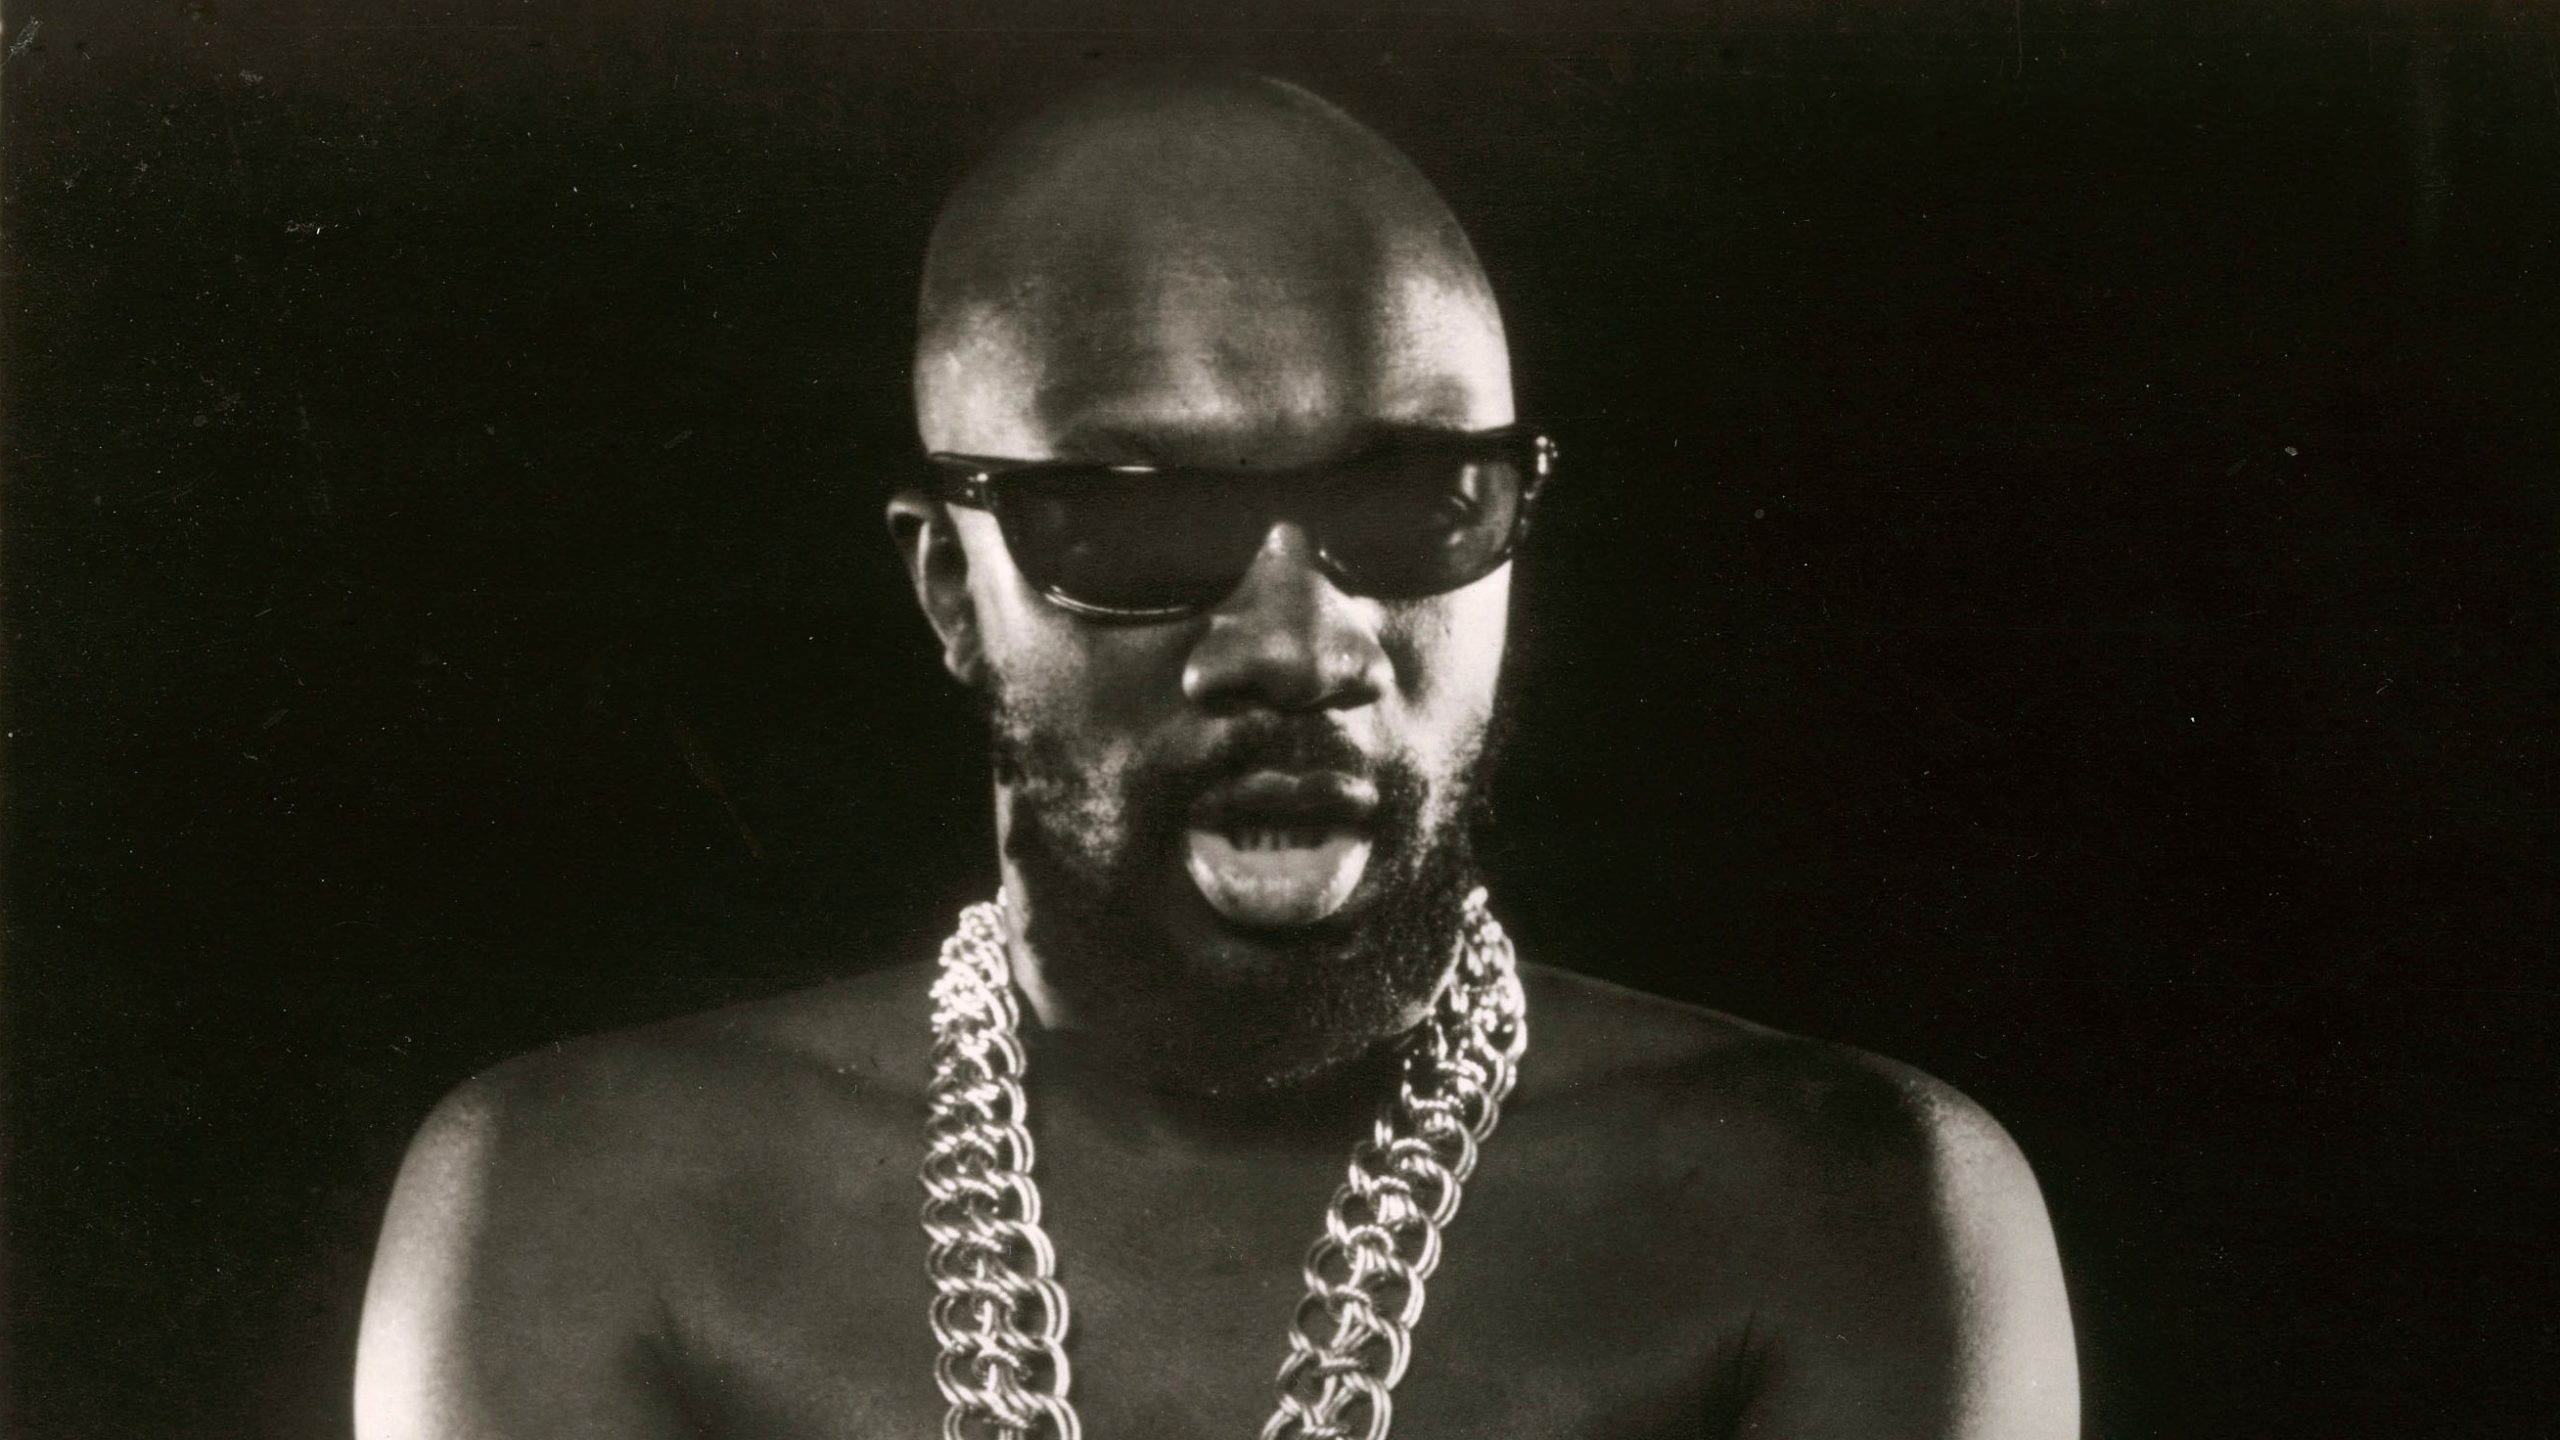 Portrait of Isaac Hayes by Joel Broedsky and Stax